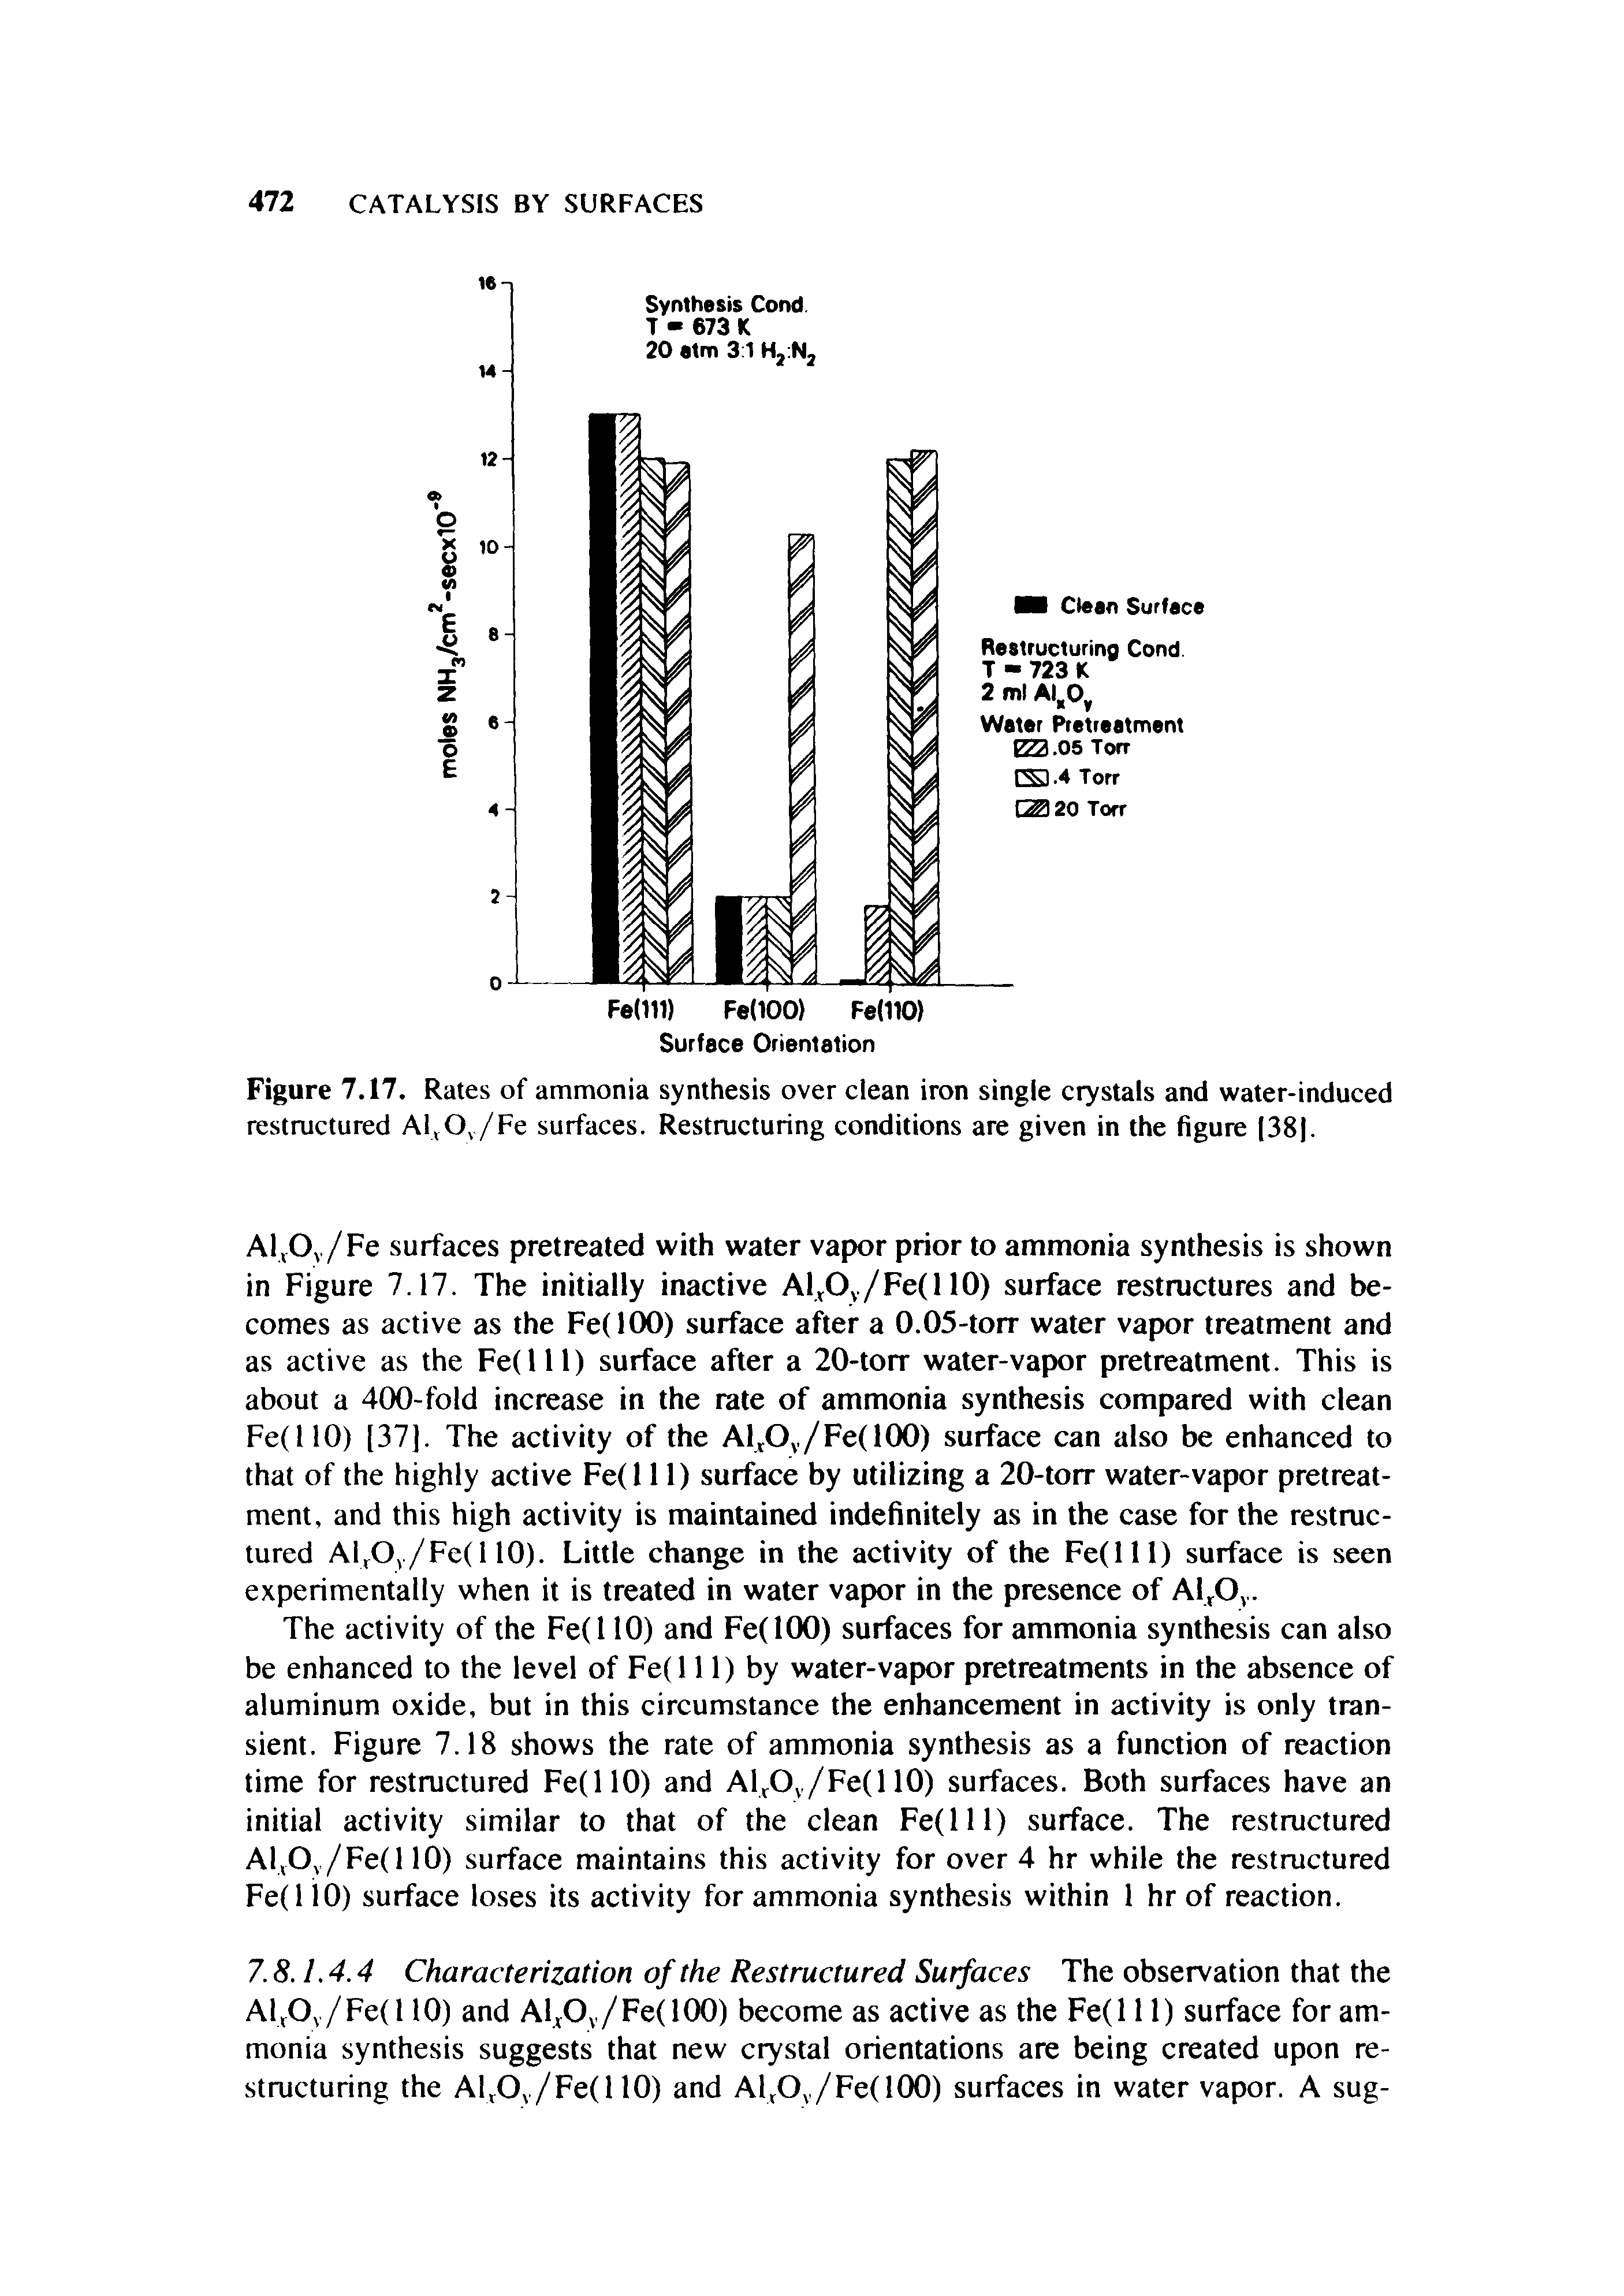 Figure 7.17. Rates of ammonia synthesis over clean iron single crystals and water-induced restructured Al,0 /Fe surfaces. Restructuring conditions are given in the figure (38J.